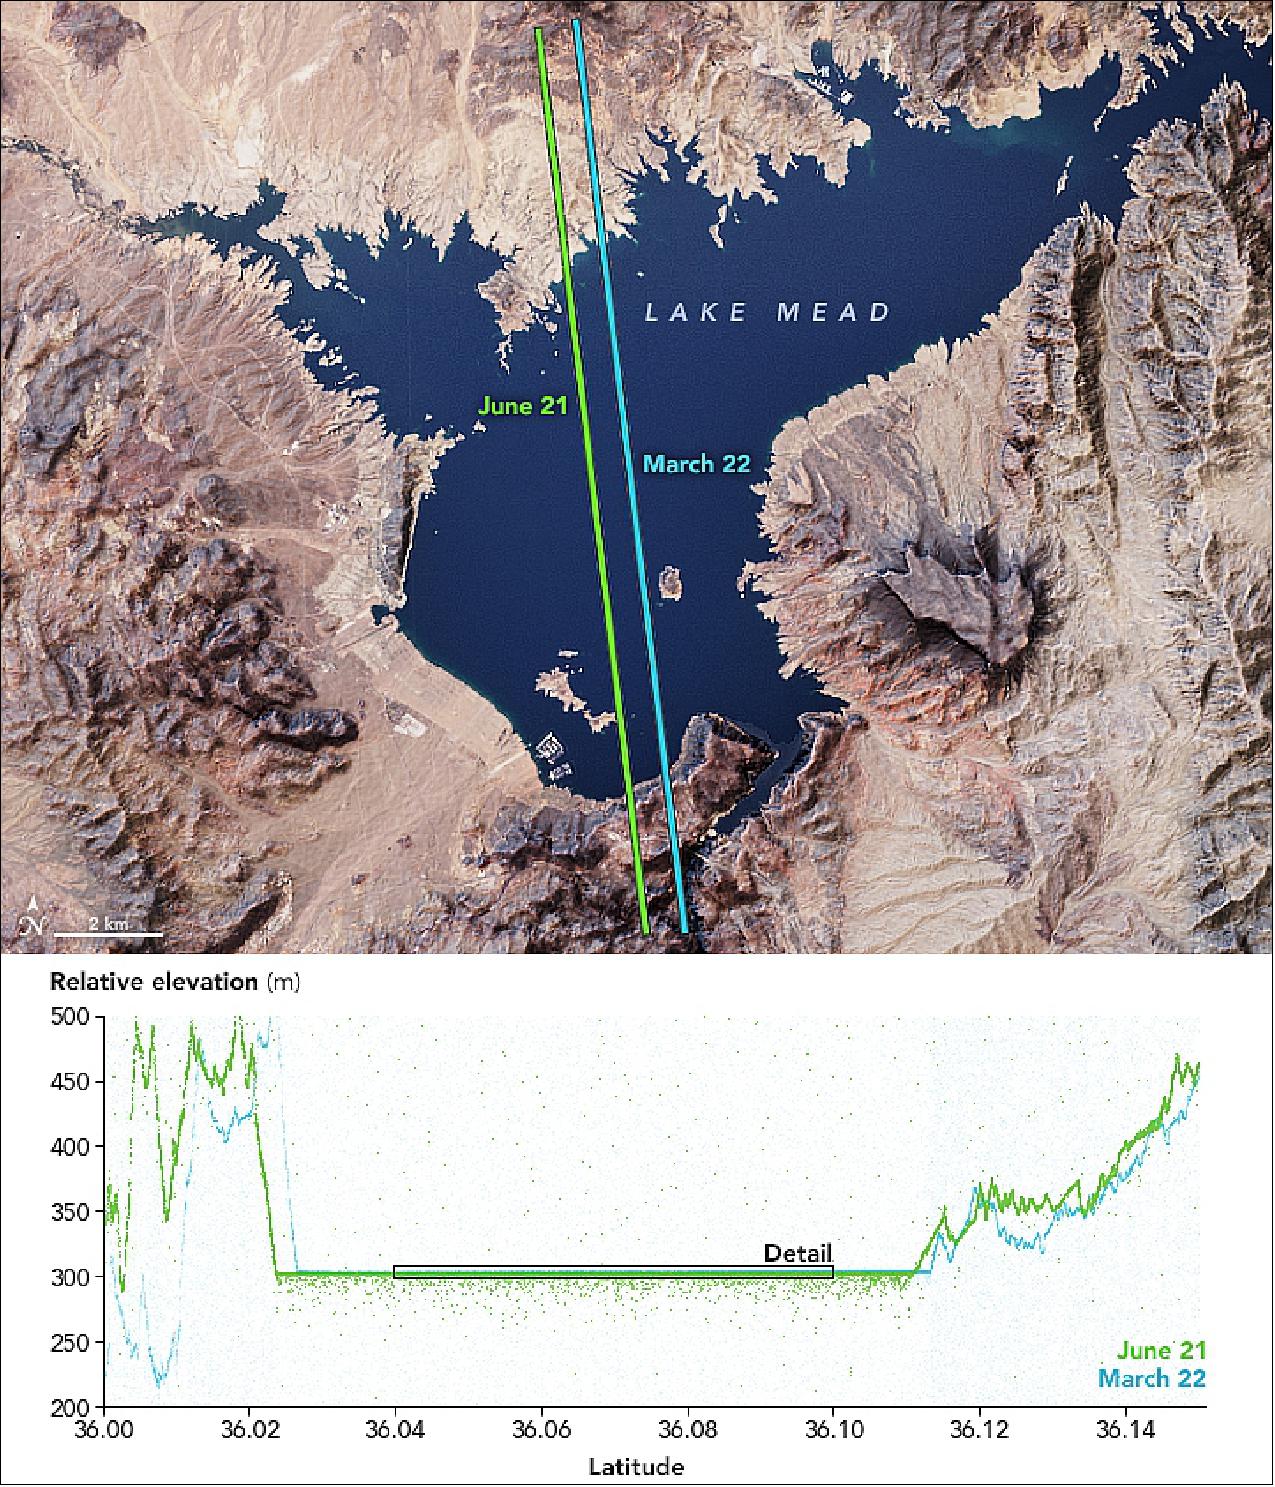 Figure 43: In this reservoir along the Colorado River at the Arizona-Nevada border, water levels rise and fall with the seasons each year. The seasonal change is visible in these elevation measurements acquired during two passes over Lake Mead by the ATLAS (Advanced Topographic Laser Altimeter System) instrument on NASA’s ICESat-2. The first pass (blue) measured the lake’s relative elevation on March 22, 2019, two days after the spring equinox. The second pass (green) measured the elevation on the summer solstice, June 21, 2019. - For reference, the satellite’s parallel passes—about a half-mile apart—are shown over a natural-color image of the lake acquired by the Landsat 8 satellite. That image is overlaid on topography data from NASA’s Shuttle Radar Topography Mission (SRTM) to emphasize the terrain (image credit: NASA Earth Observatory, images by Joshua Stevens, using ICESat-2 data courtesy of Kaitlin Harbeck (NASA/GSFC), Landsat data from the U.S. Geological Survey, and topographic data from SRTM (Shuttle Radar Topography Mission). Story by Kathryn Hansen, inspired by #PhotonPhriday)